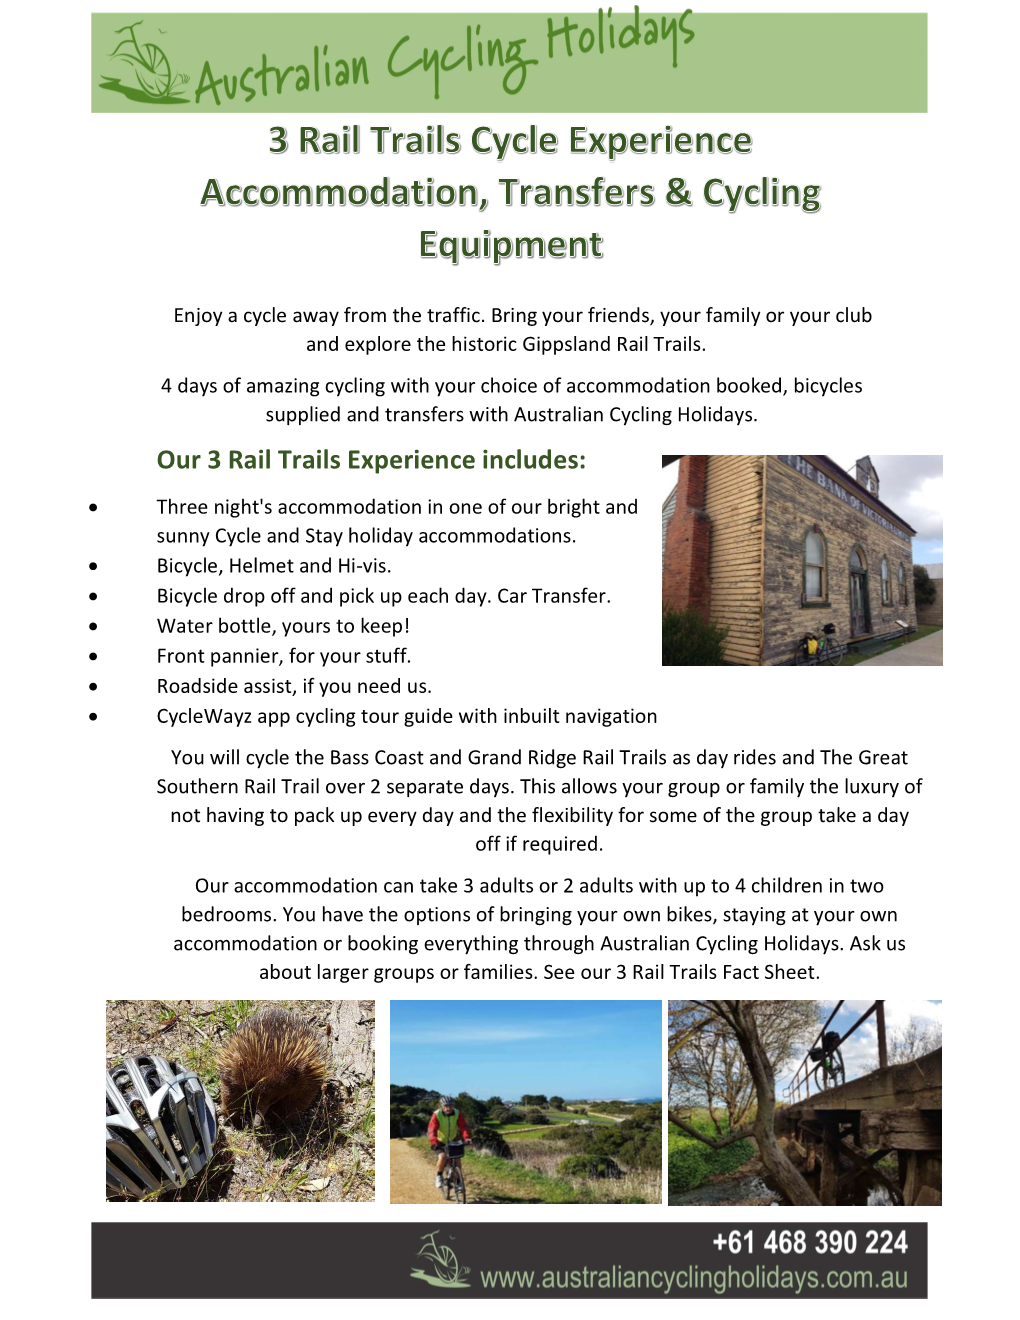 Our 3 Rail Trails Experience Includes:  Three Night's Accommodation in One of Our Bright and Sunny Cycle and Stay Holiday Accommodations